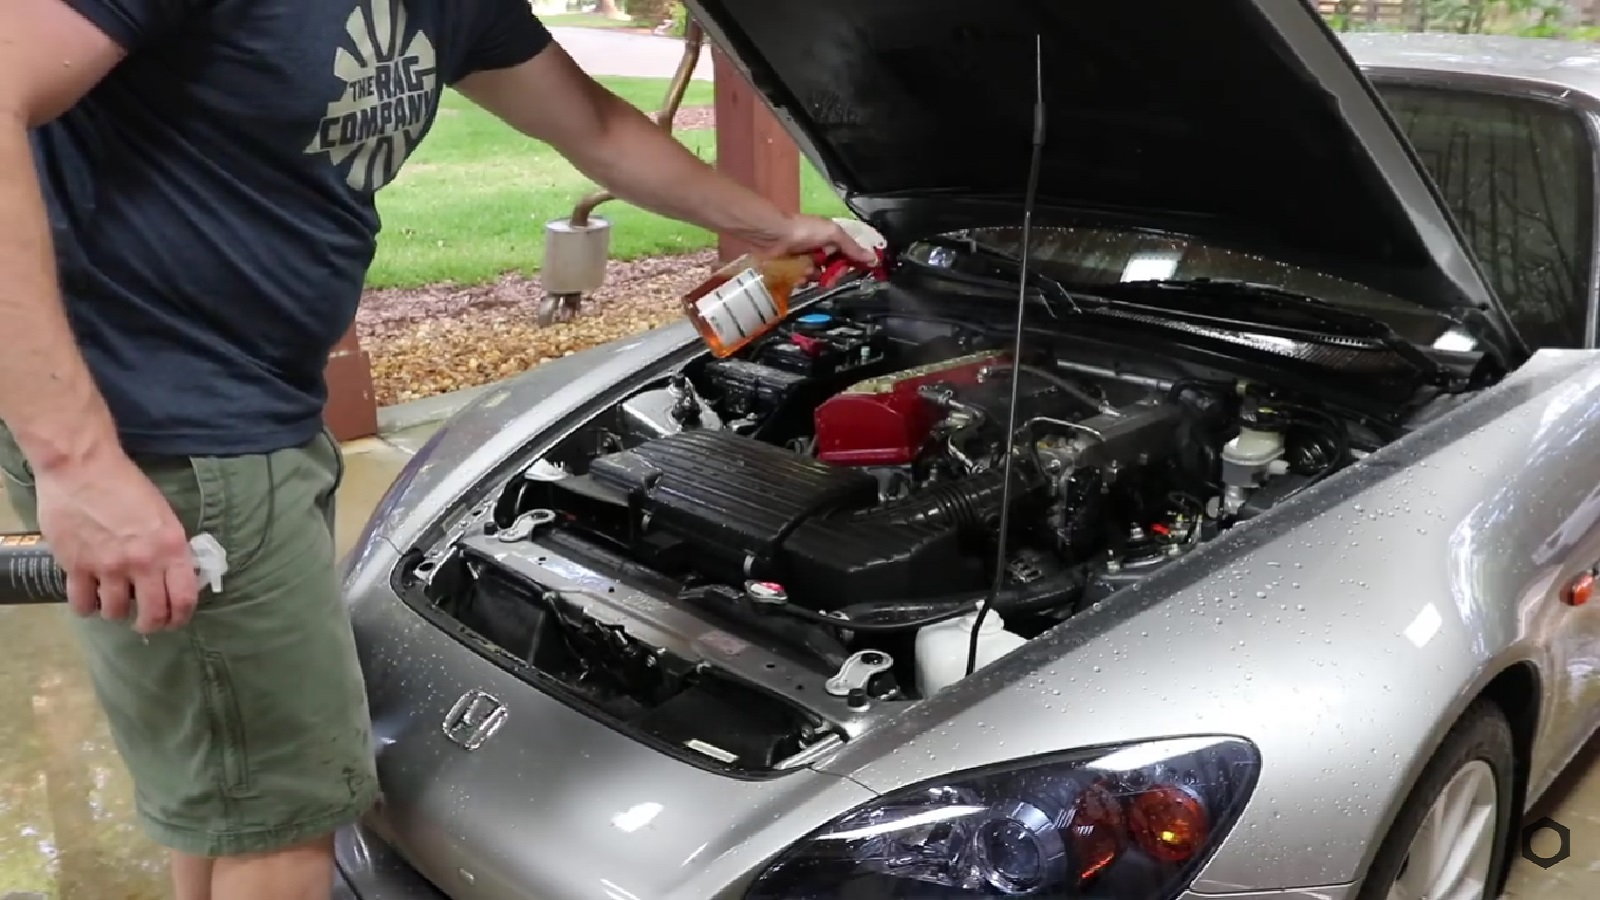 Daily Slideshow: Cleaning the Engine Bay